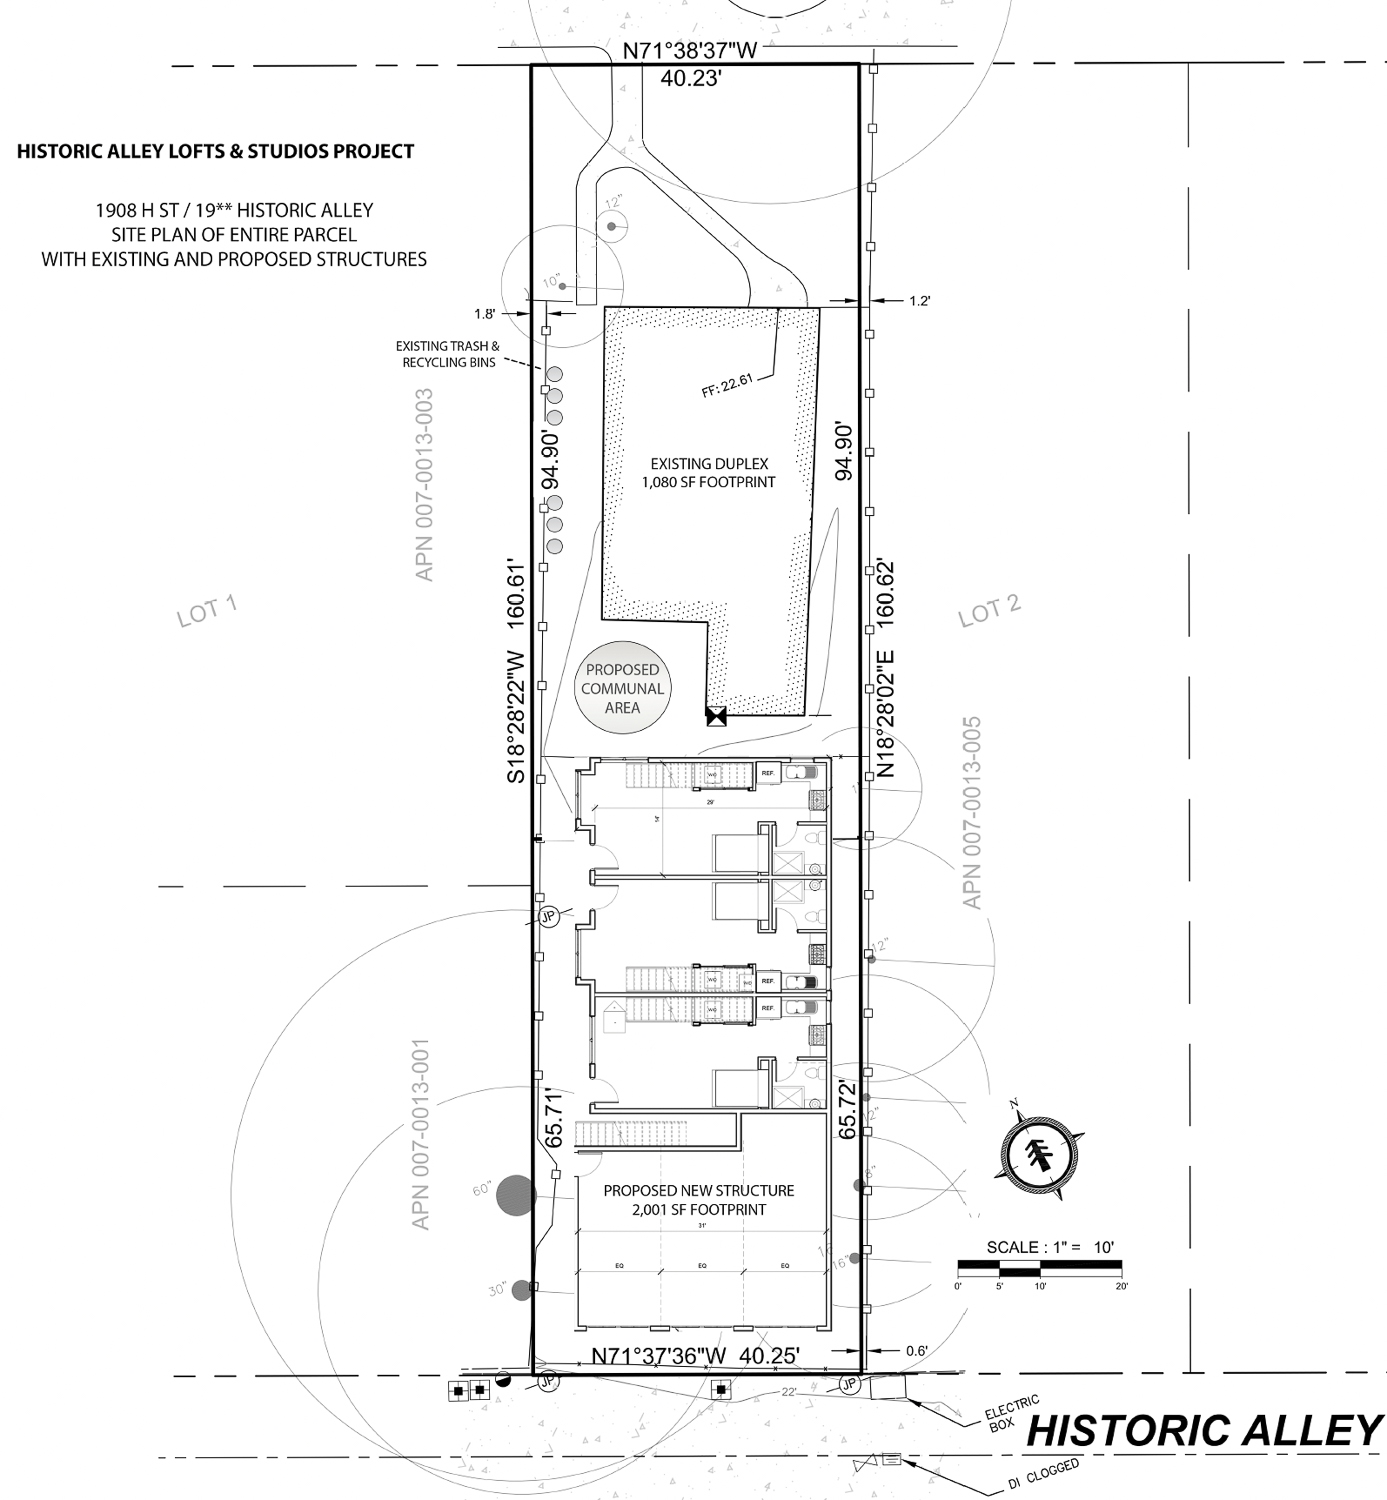 1908 H Street site map with the existing building and proposed new structure, floor plans courtesy the Warren Trust